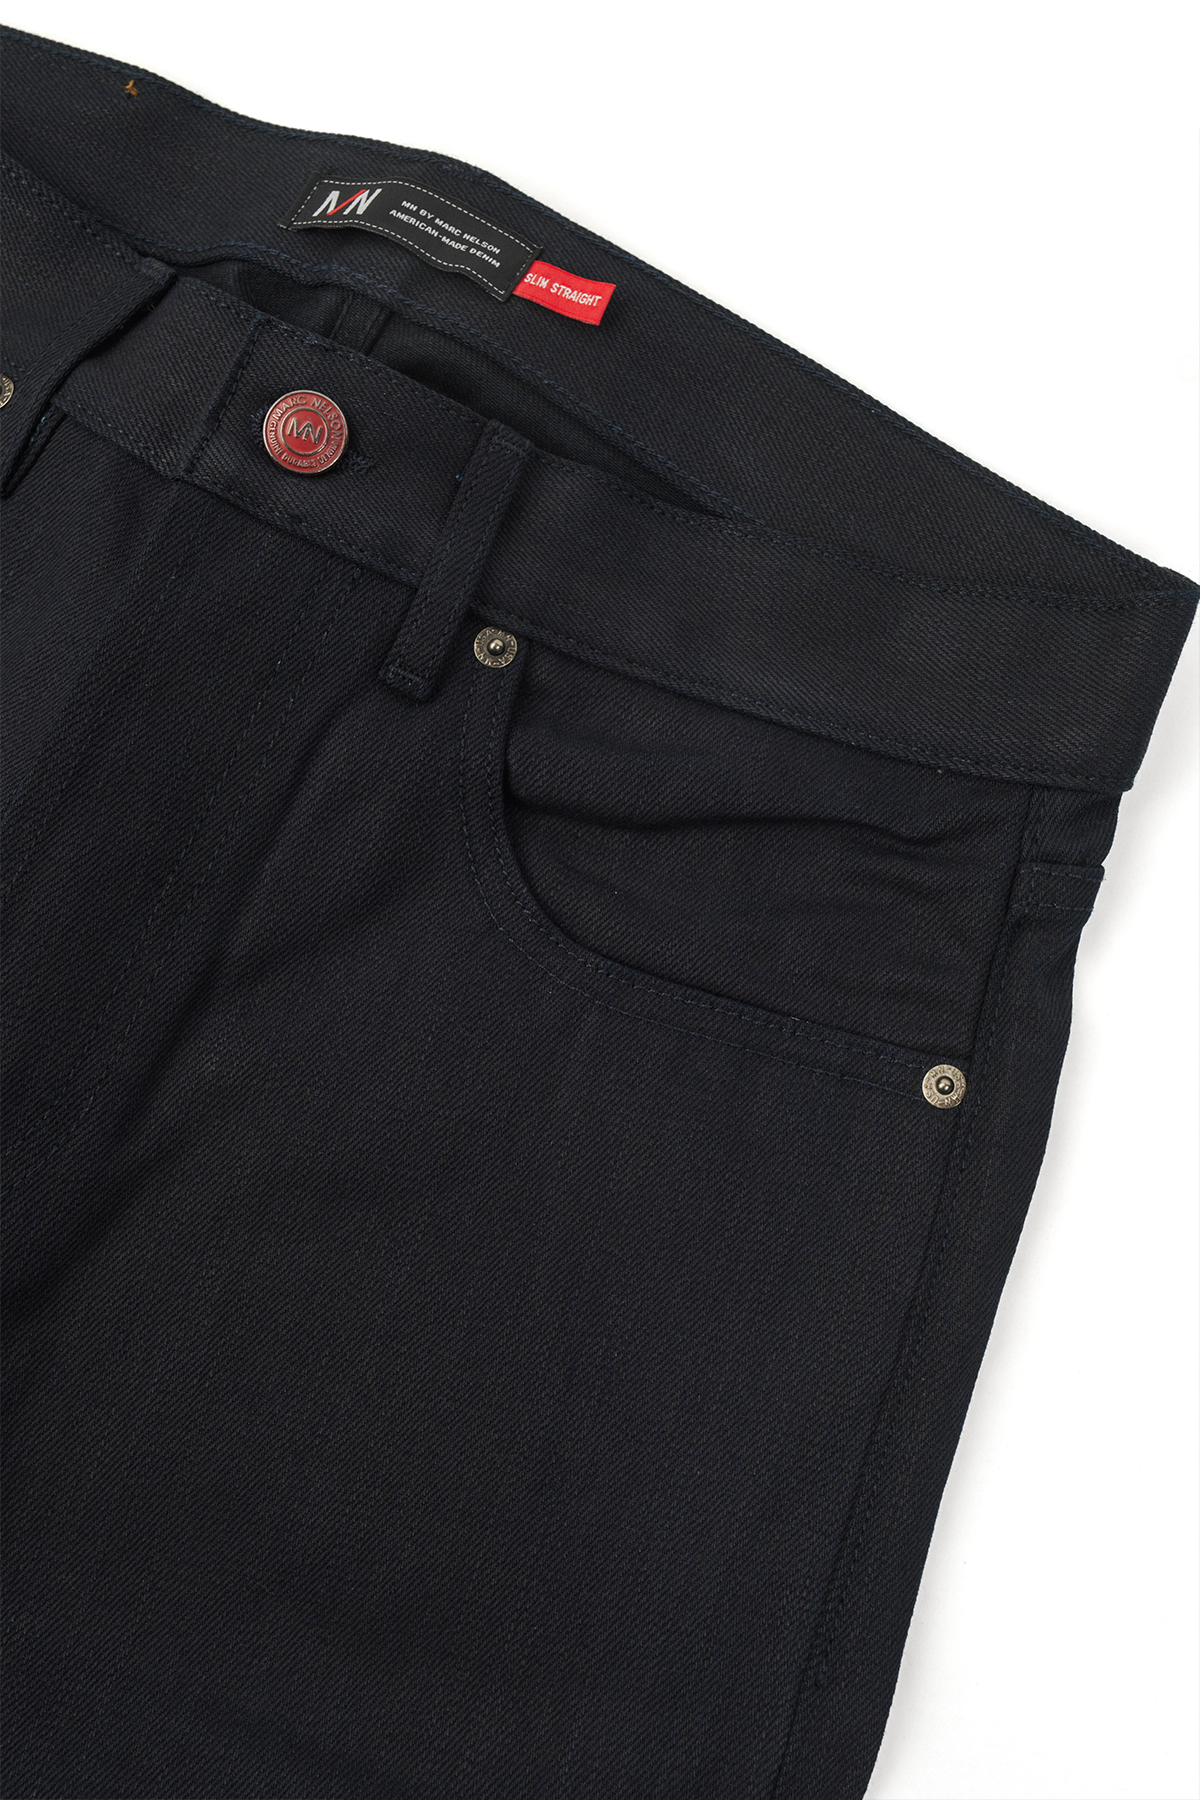 Close up photo of Kaihara blue stitch denim on white background showing the front pocket and front button. 